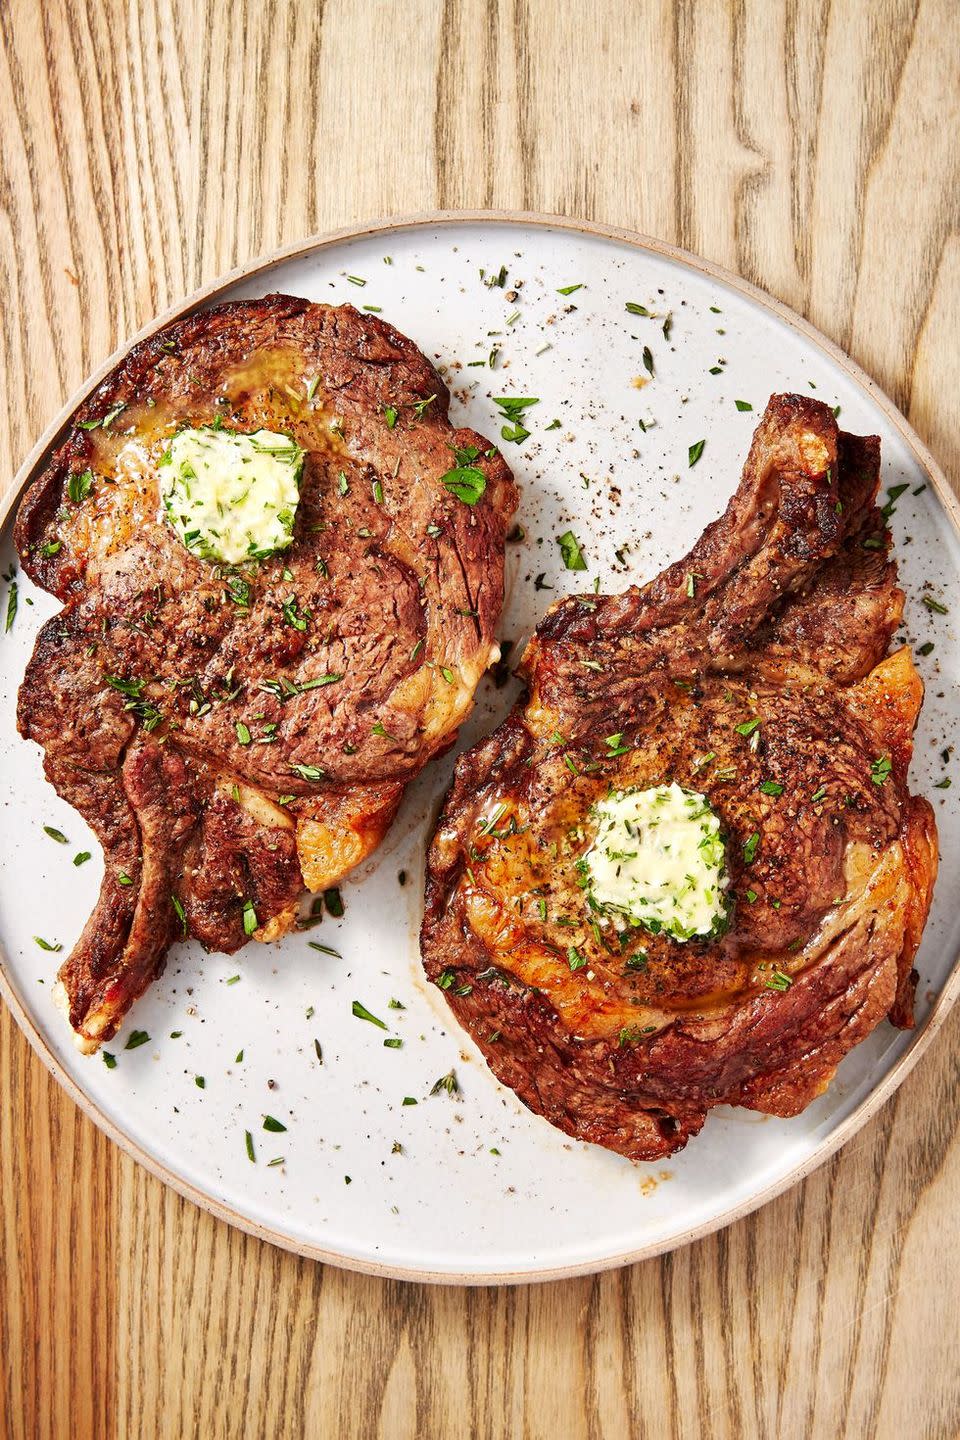 <p>A <a href="https://www.delish.com/uk/cooking/recipes/a30252481/how-to-pan-fry-steak/" rel="nofollow noopener" target="_blank" data-ylk="slk:perfectly seared steak" class="link rapid-noclick-resp">perfectly seared steak</a> can seem like a daunting task. Getting the golden, crusty sear on the outside and trying not to overcook your steak can be difficult. </p><p>What if we told you that your air fryer can take all of that stress away? It's true! Leave it to the air fryer to cook a perfect piece of steak all without filling your kitchen with smoke or turning on the grill. As for the herb butter? It's not mandatory, but it sure is delicious. </p><p>Get the <a href="https://www.delish.com/uk/cooking/recipes/a32284104/air-fryer-steak-recipe/" rel="nofollow noopener" target="_blank" data-ylk="slk:Air Fryer Steak" class="link rapid-noclick-resp">Air Fryer Steak</a> recipe.</p>